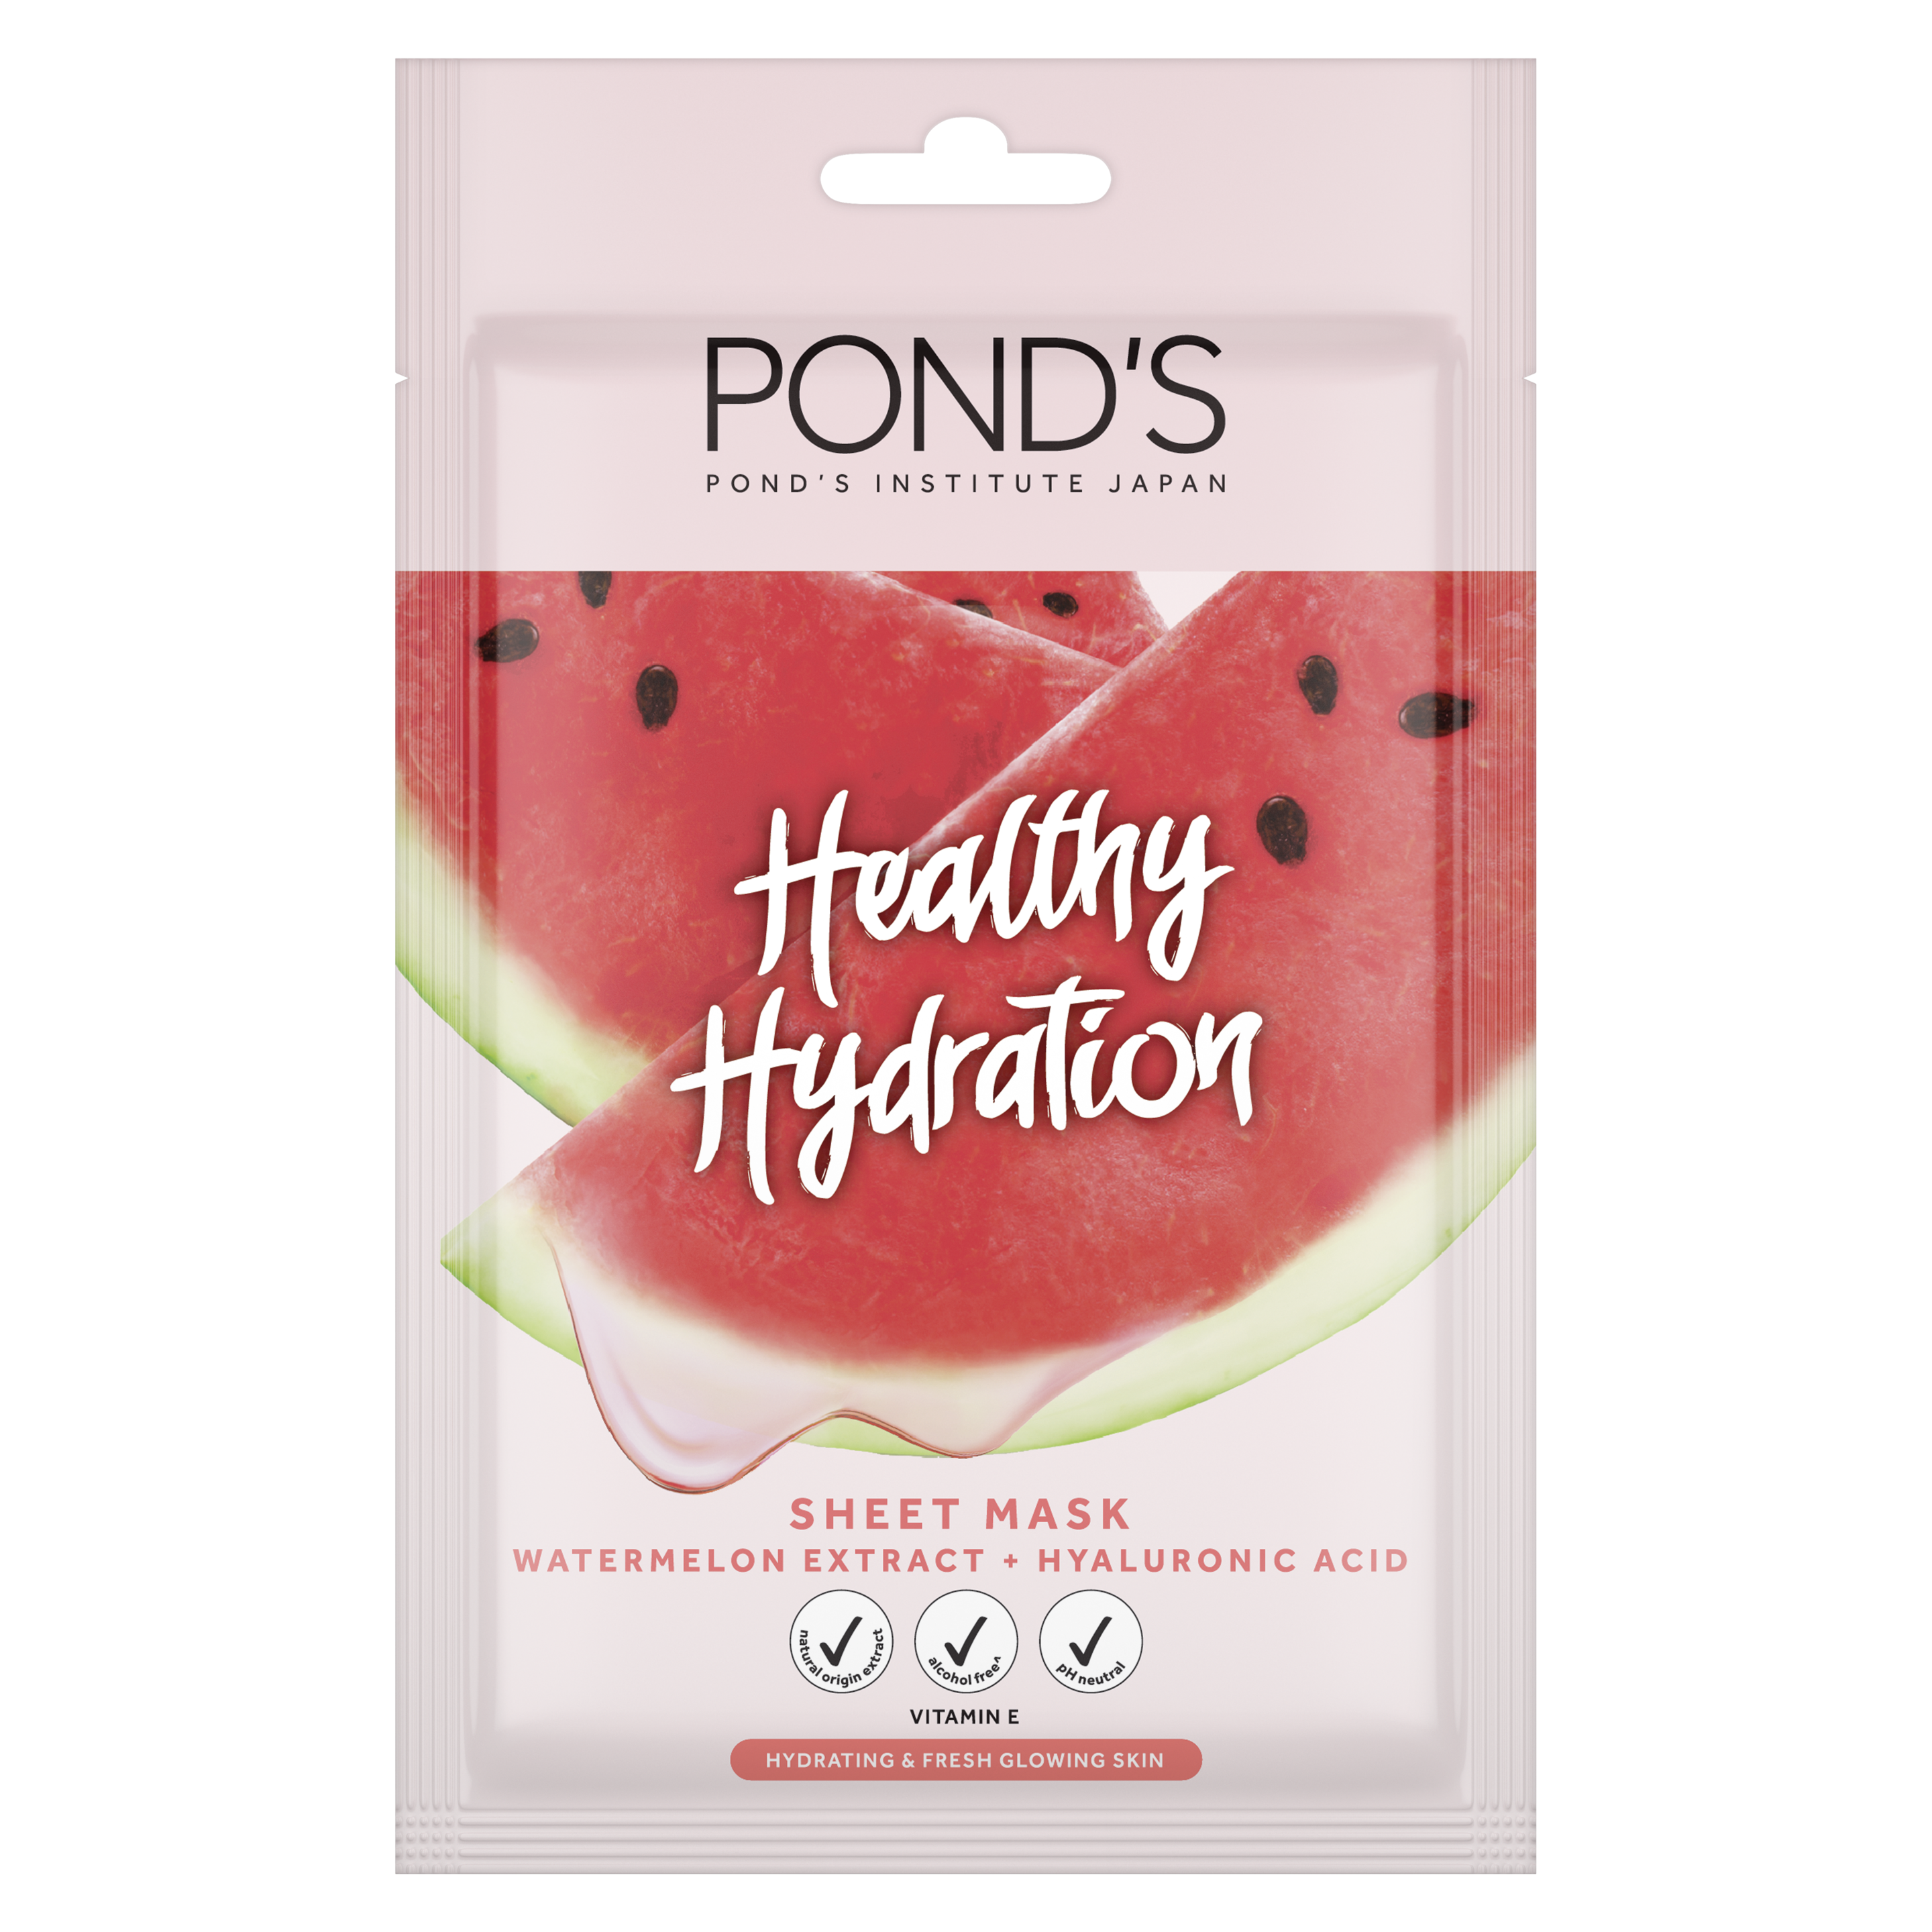 Pond's Healthy Hydration Watermelon Extract Sheet Mask